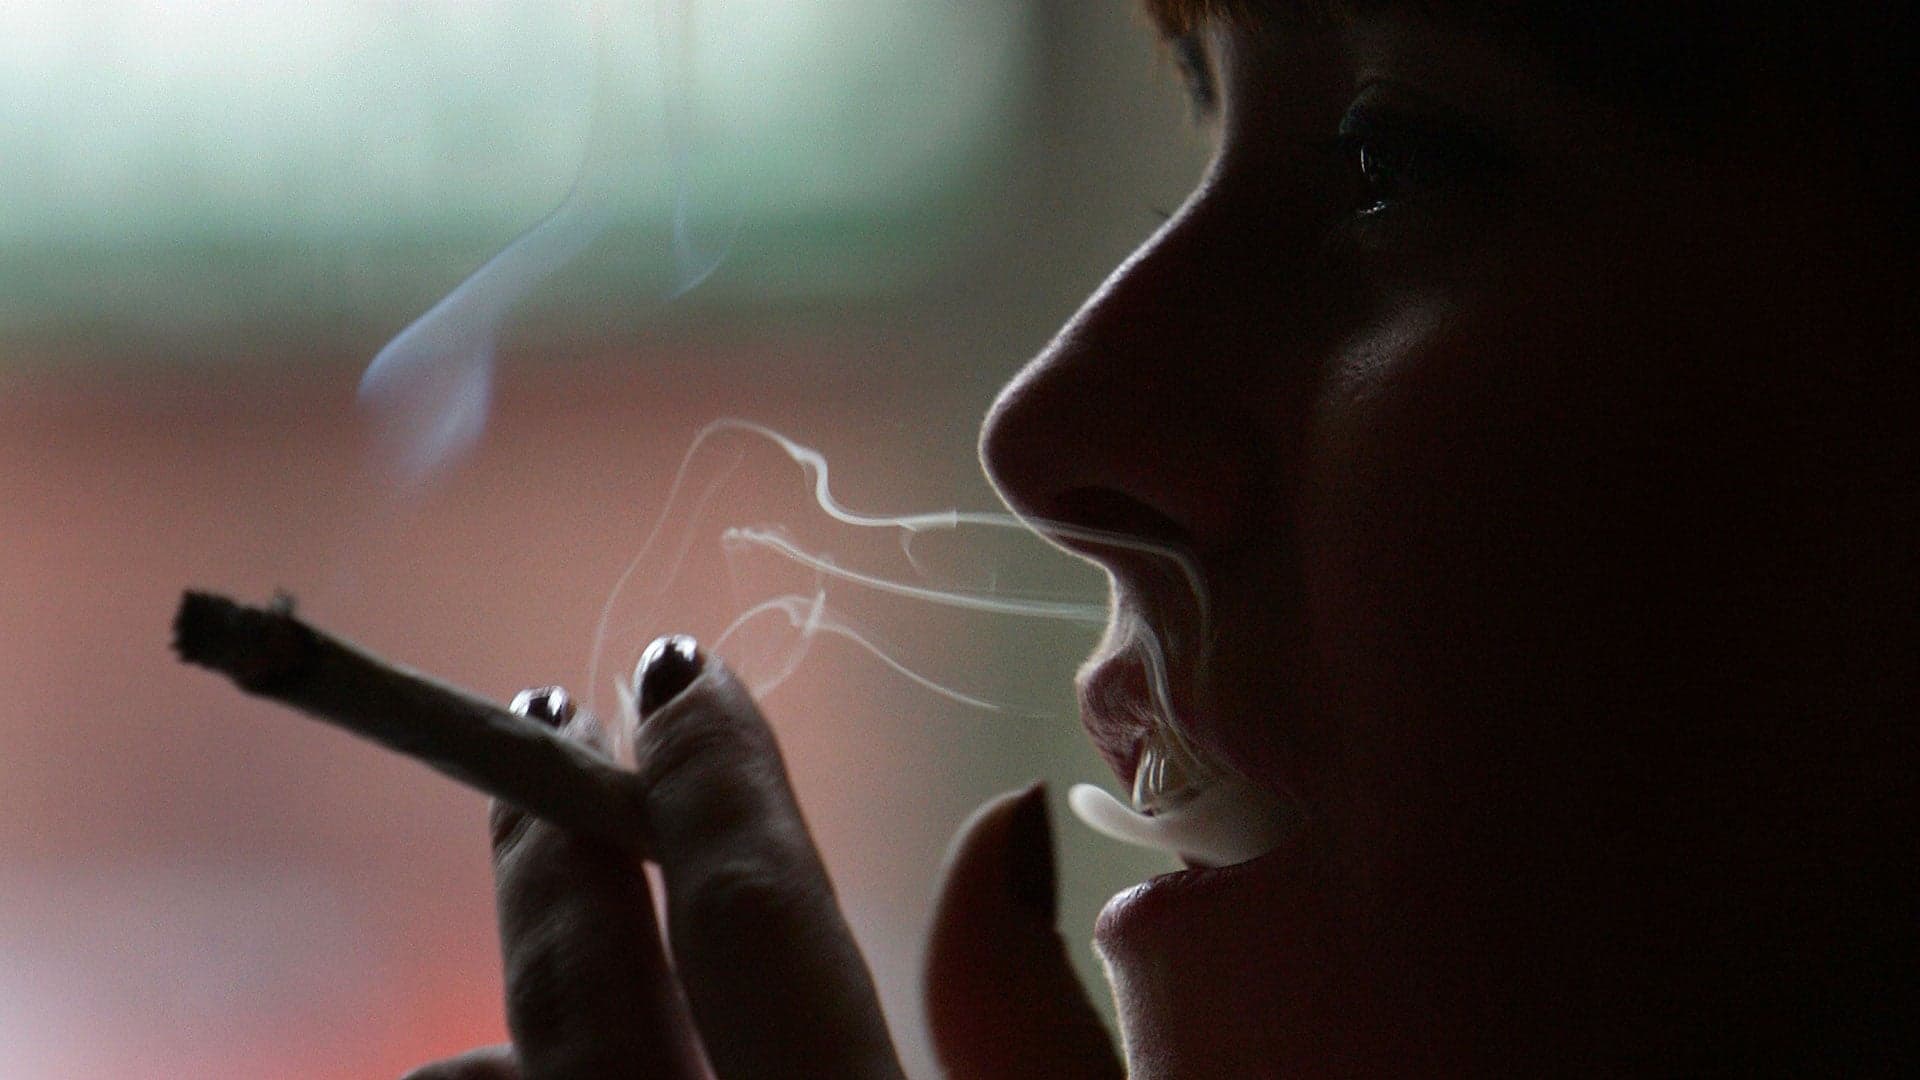 A New Saliva-Based Marijuana Test Gives Condemning Results in Just 3 Minutes